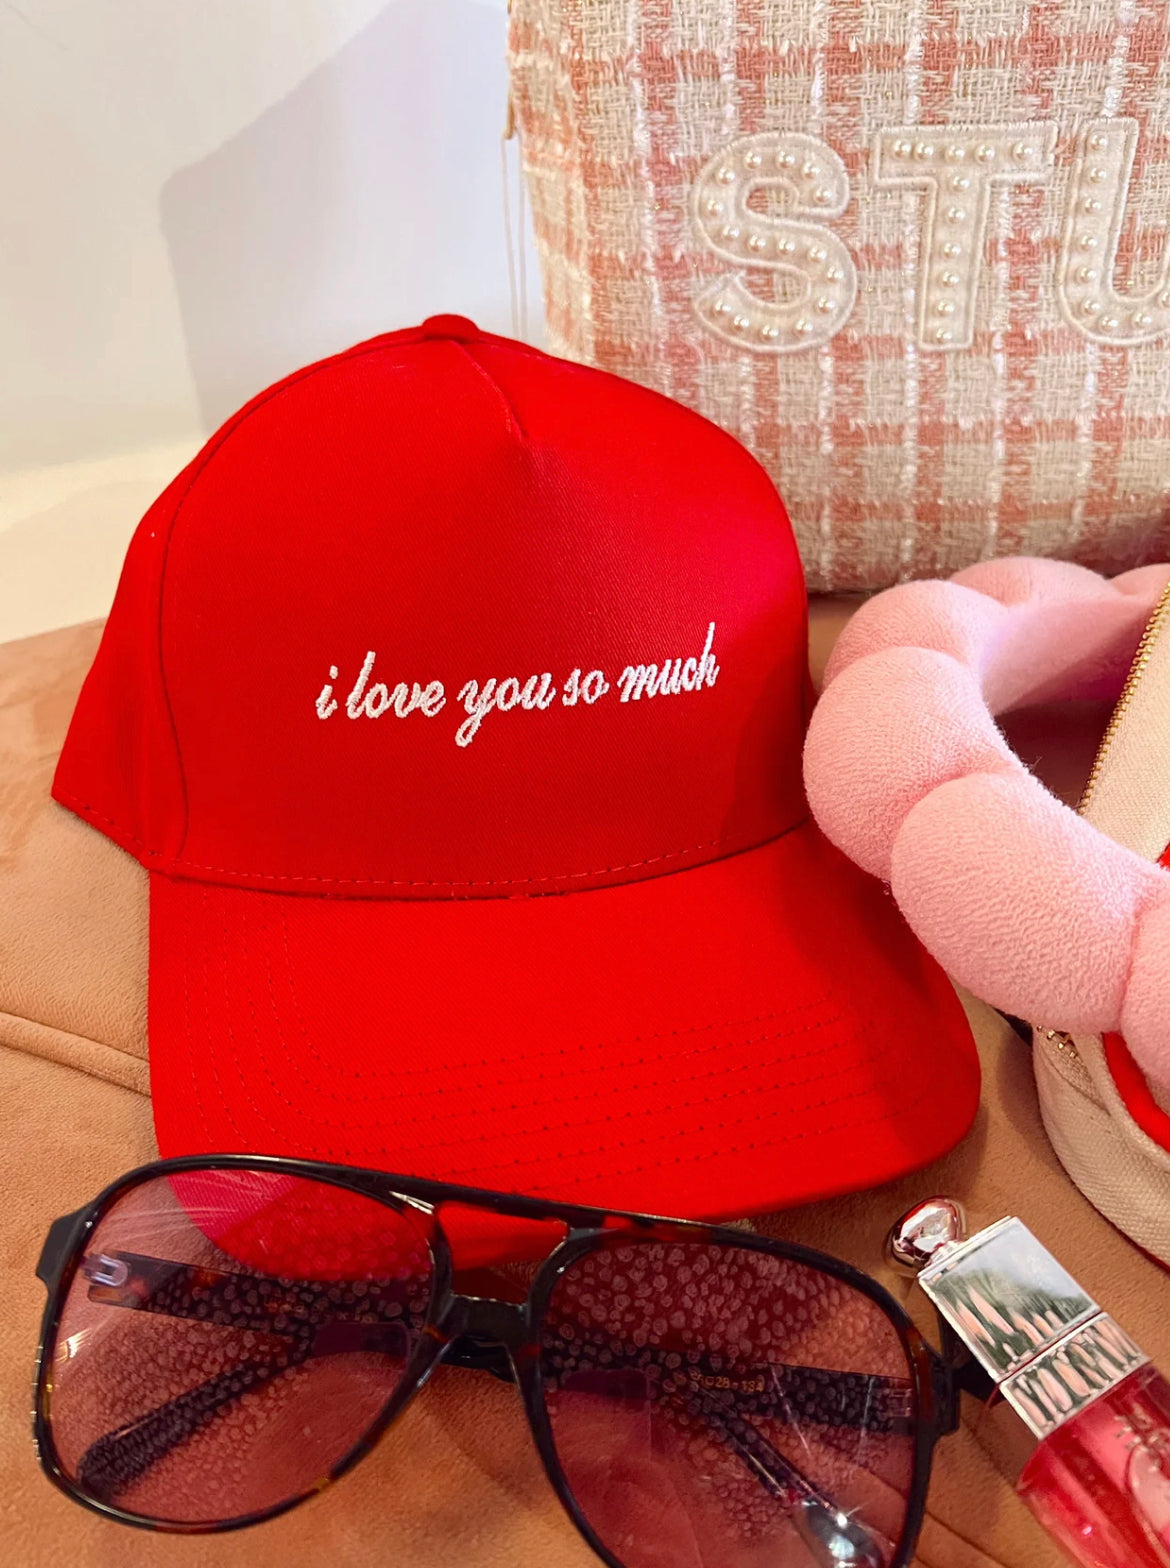 “I Love You So Much” Red Trucker Hat